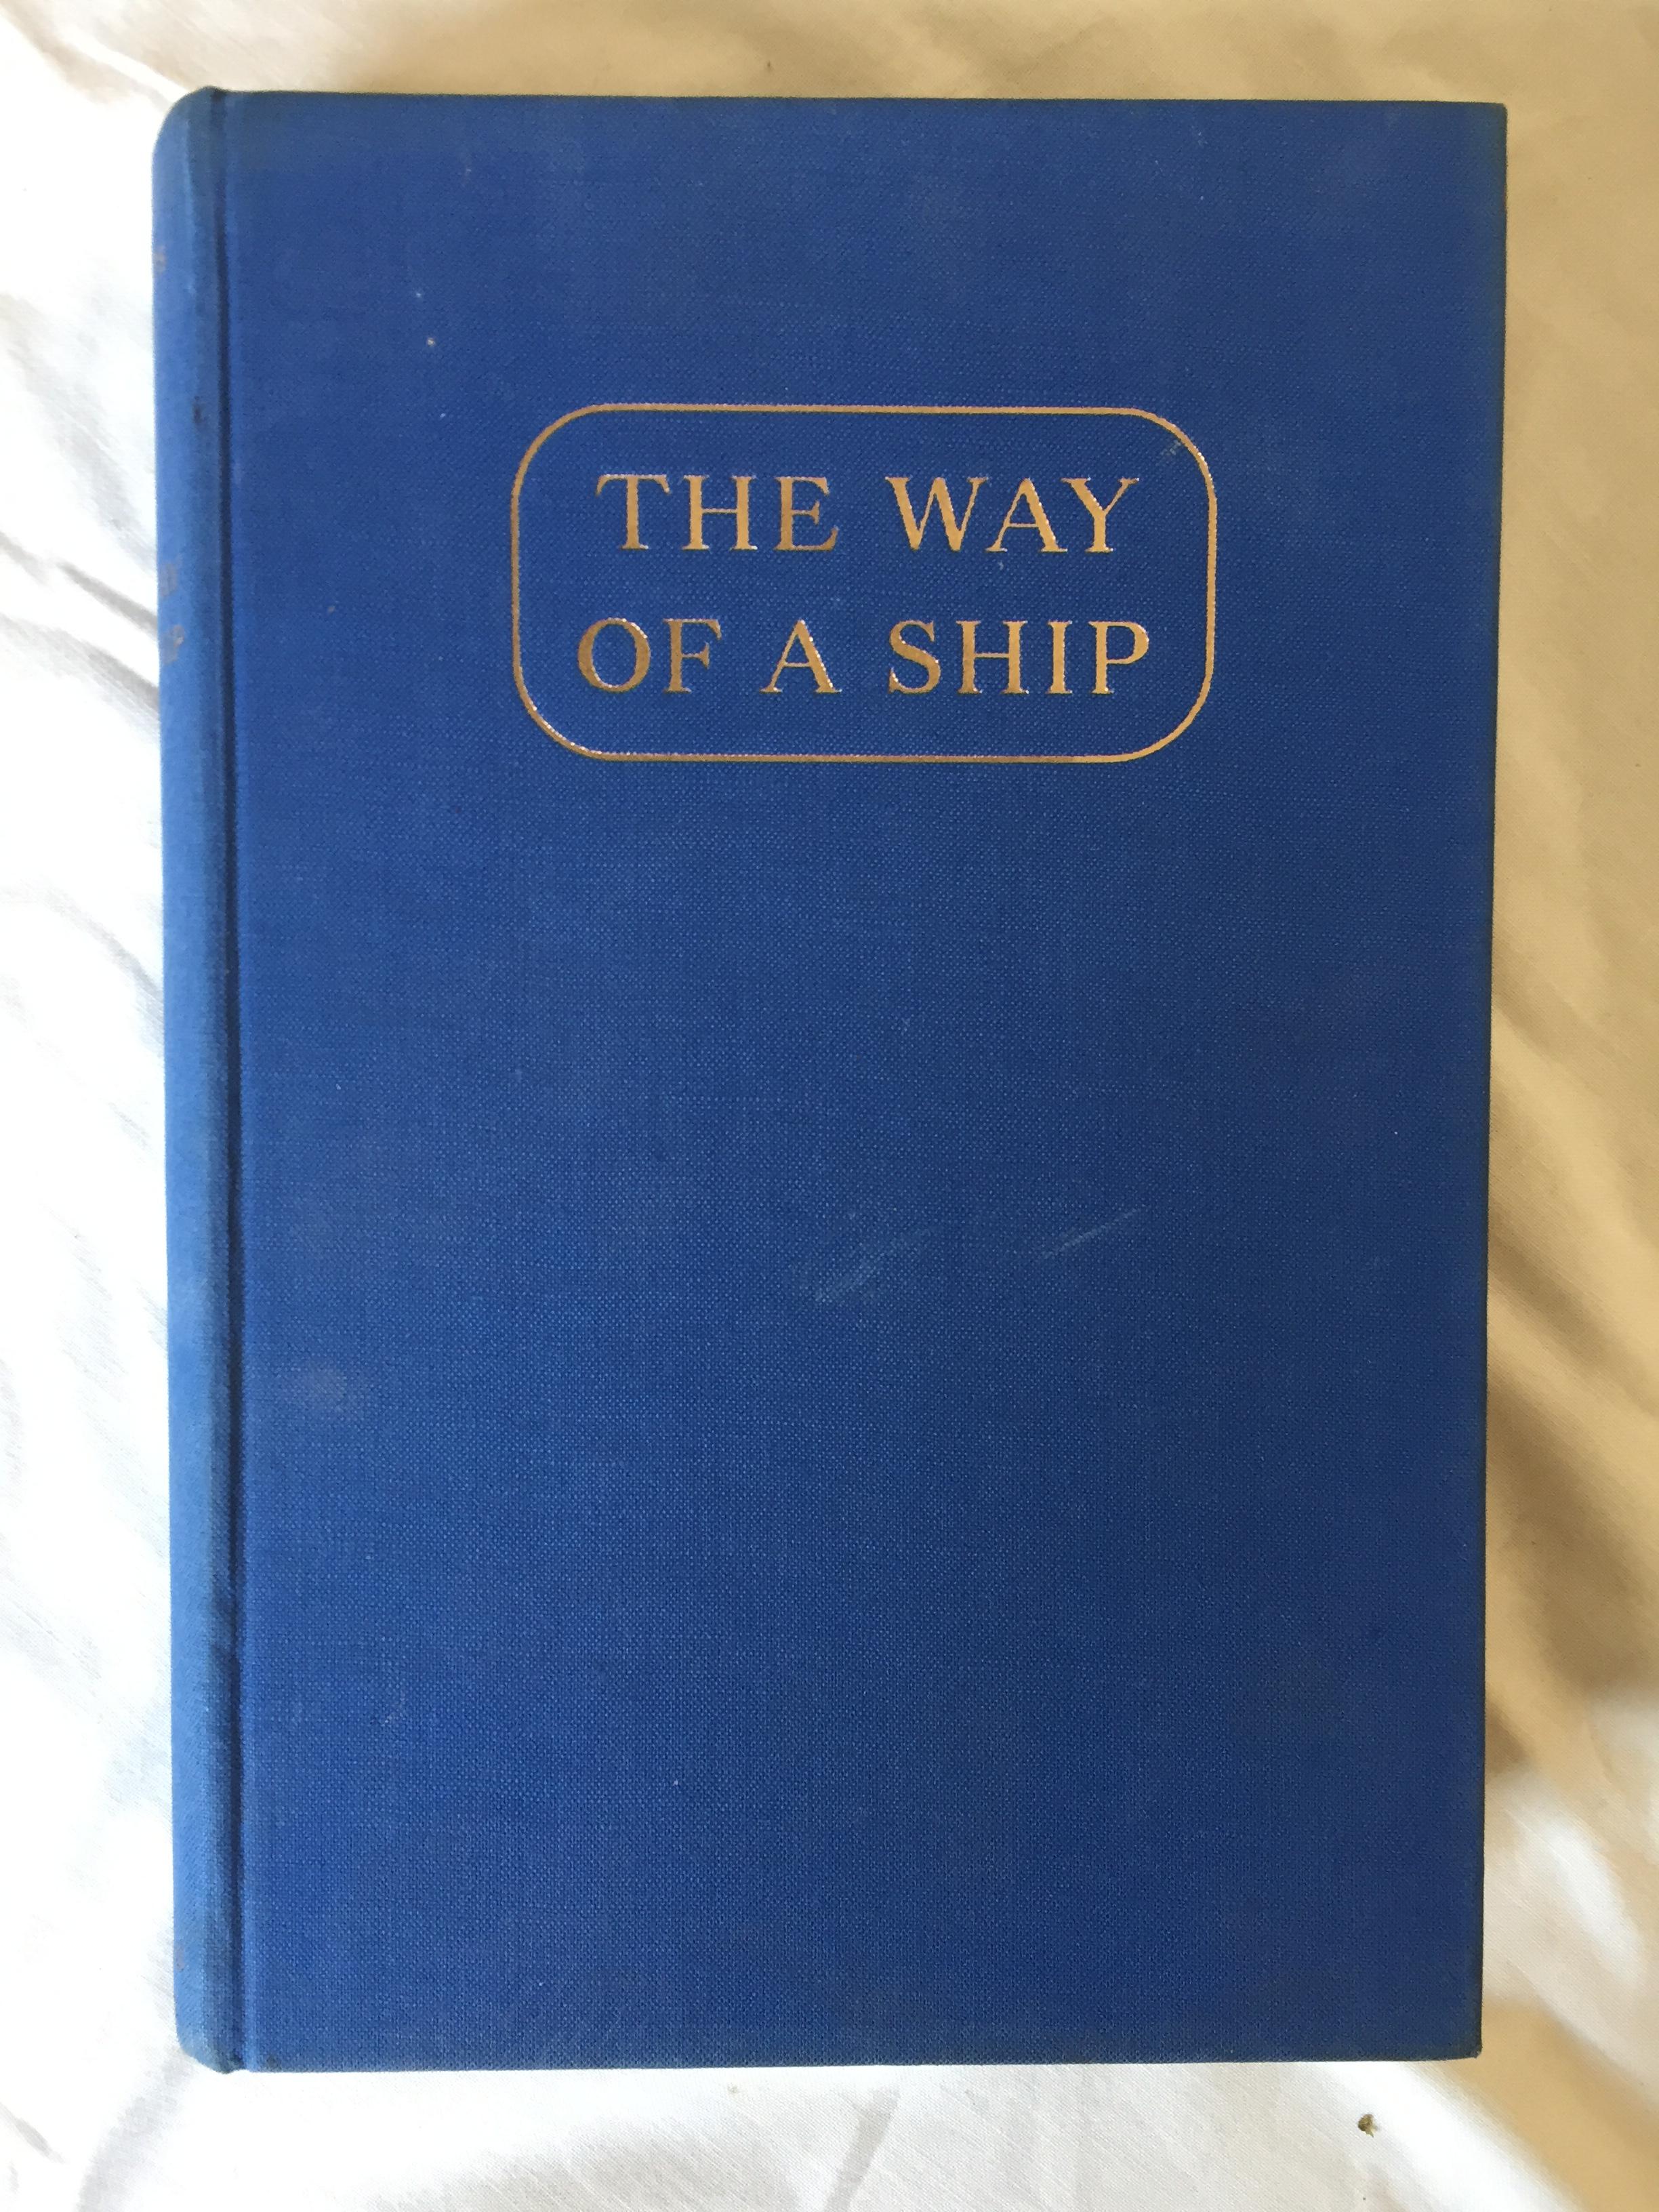 FAMOUS MARITIME BOOK ‘THE WAY OF A SHIP’ BY ALAN VILLIEURS 